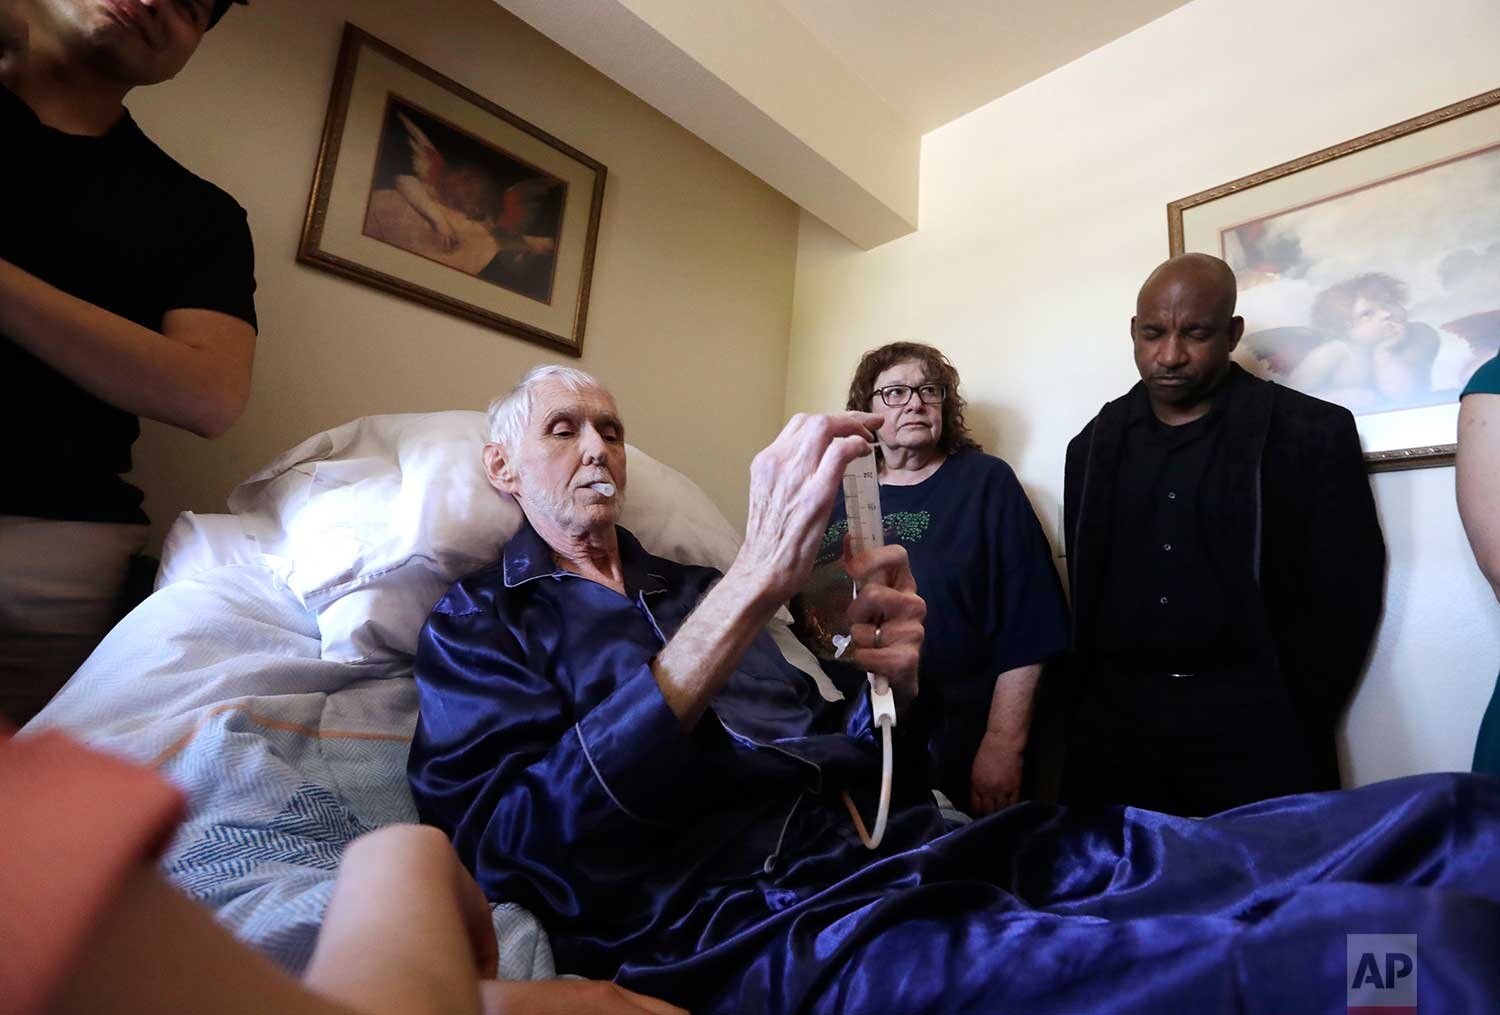  In this May 10, 2019, photo, Robert Fuller begins to plunge the drugs that will end his life into his feeding tube in Seattle. (AP Photo/Elaine Thompson) 